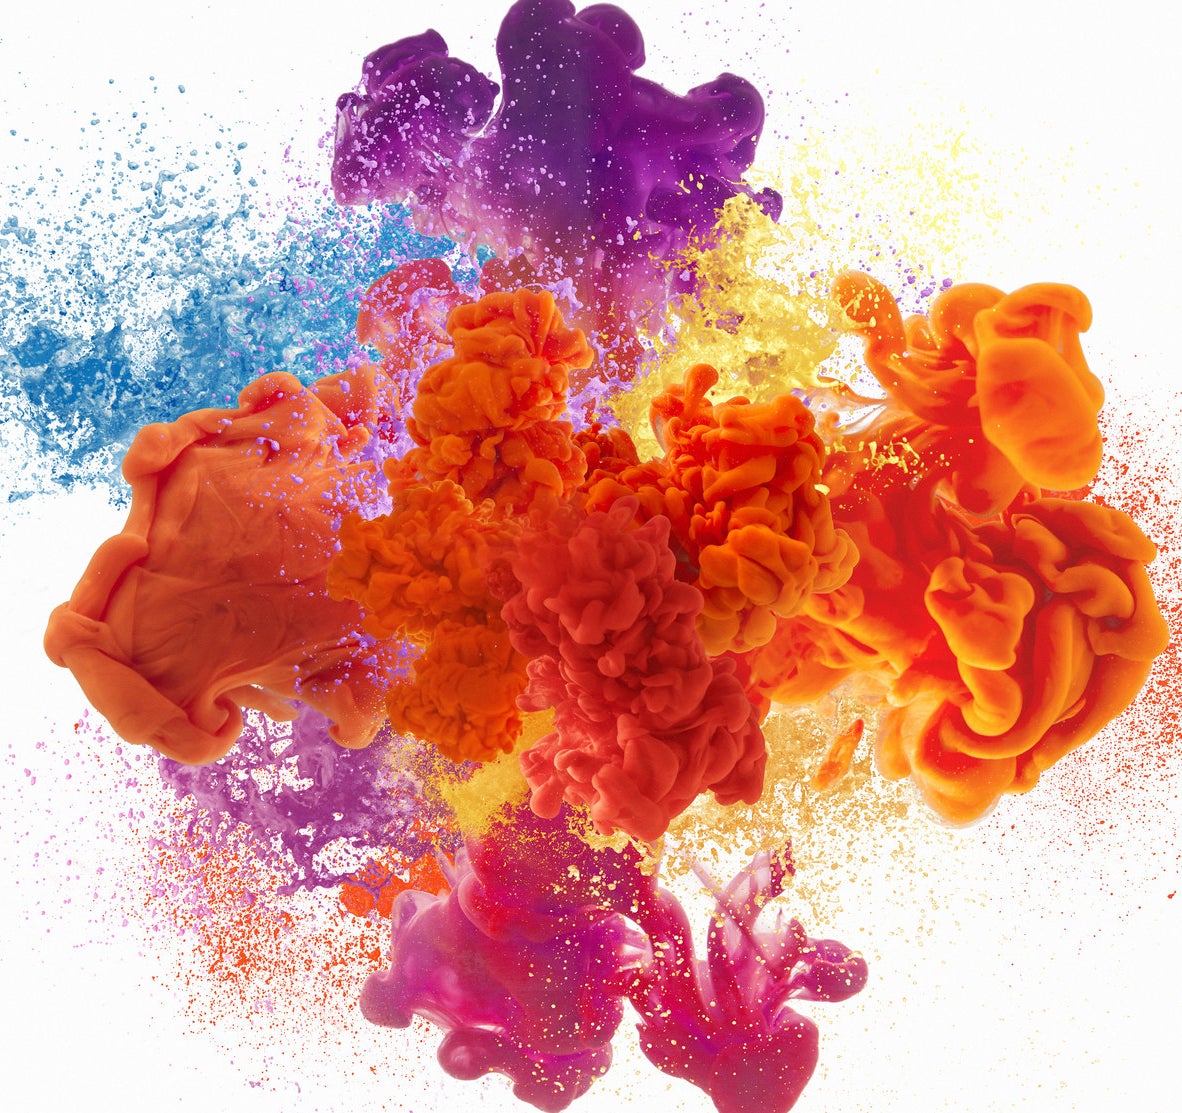 an artful explosion of colors